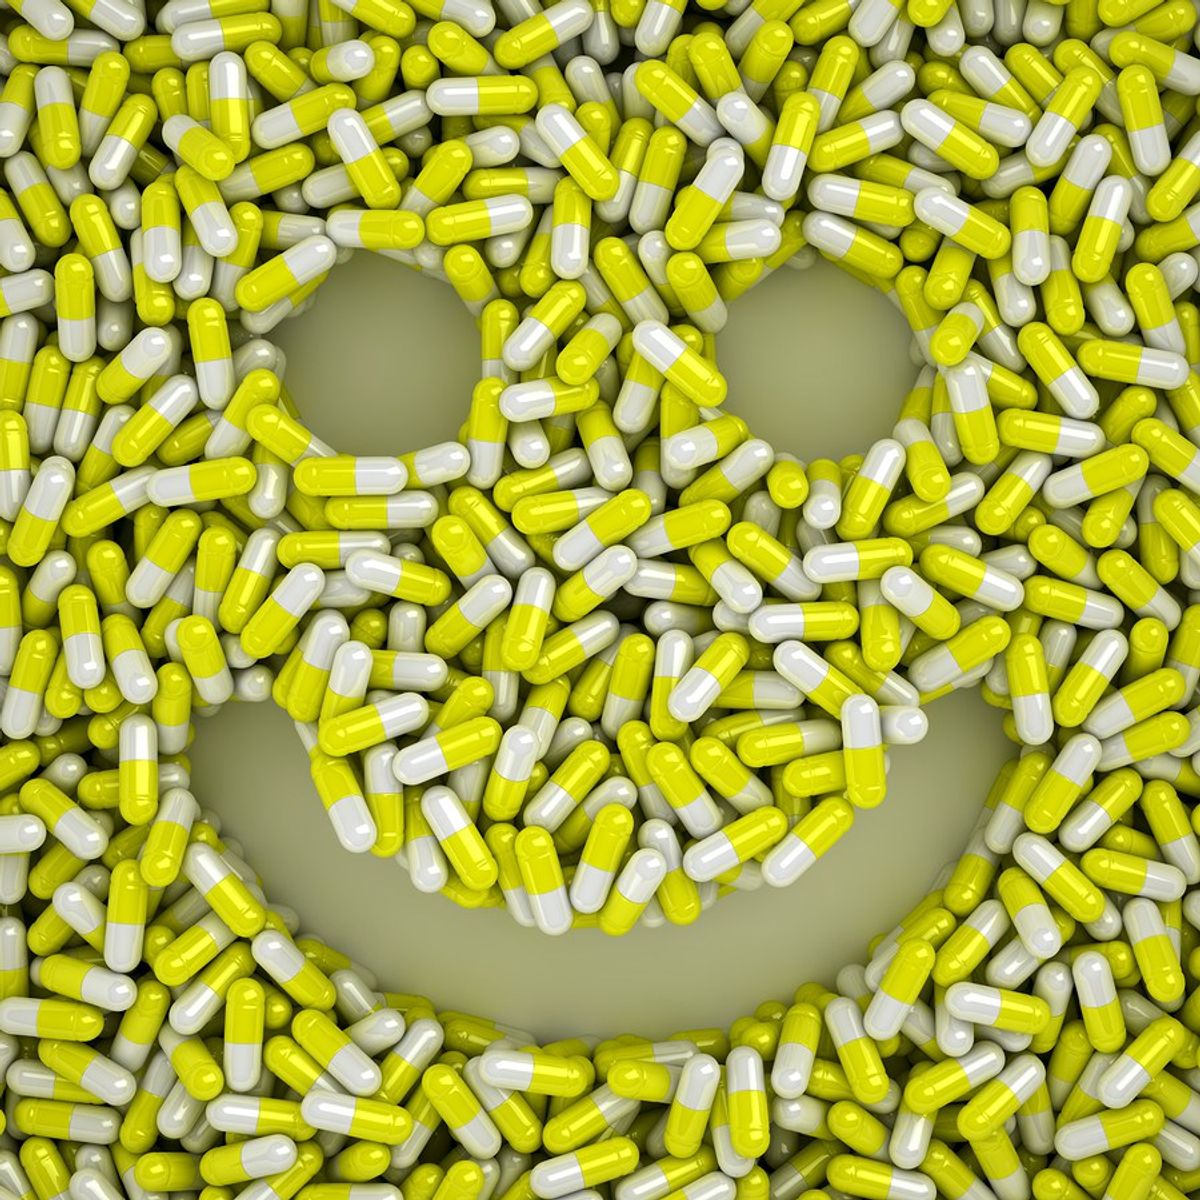 The Truth About Antidepressants